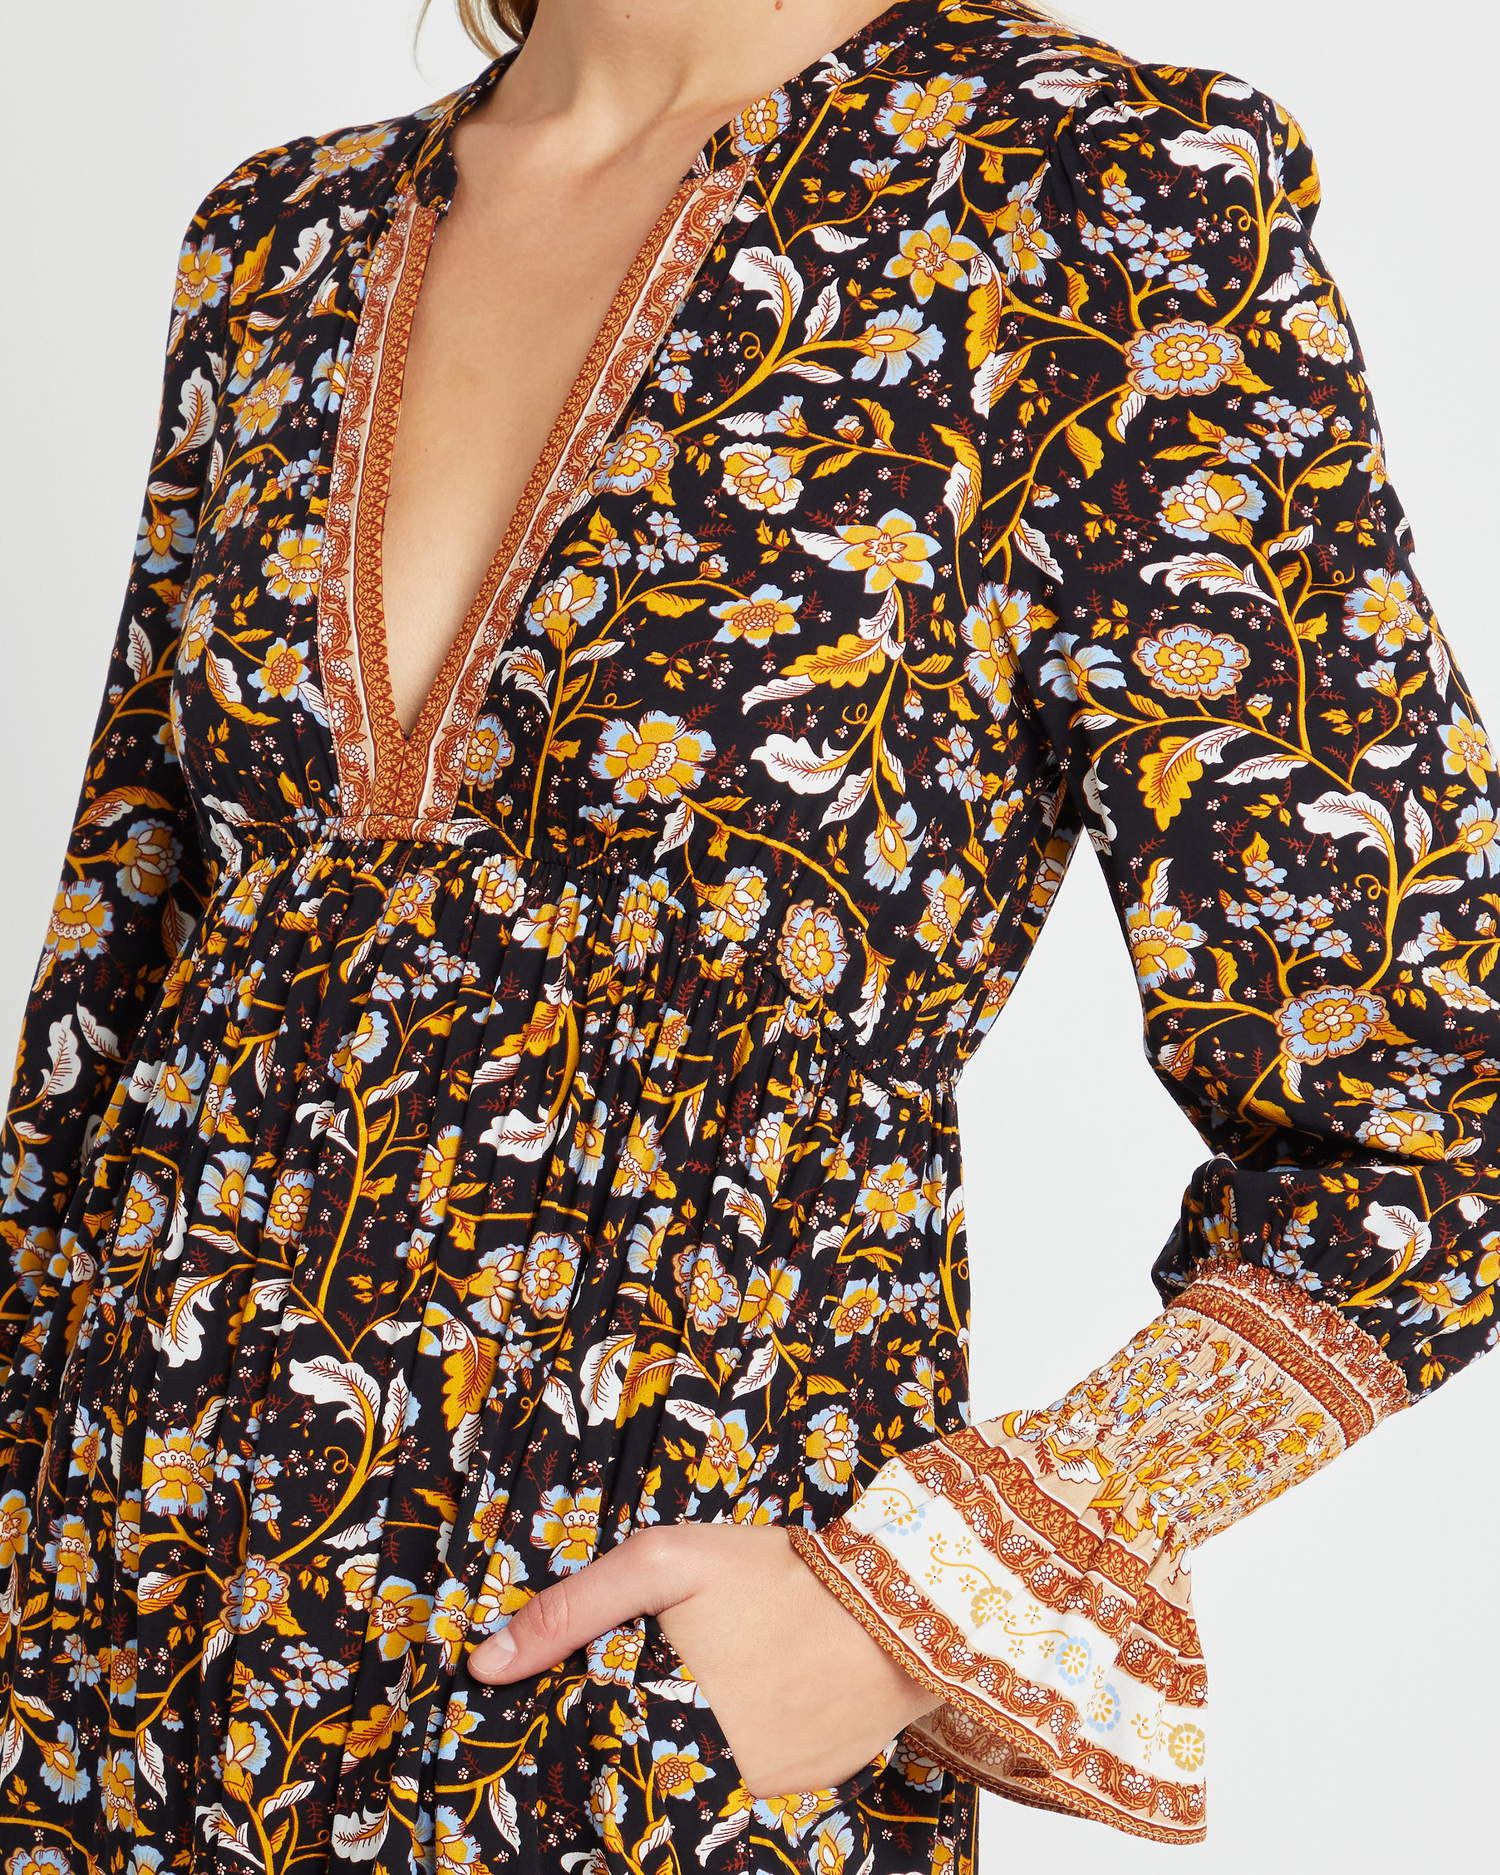 Sixth image of Zuri Dress, a yellow midi dress, long sleeve, fall, floral, V-neck, plunge